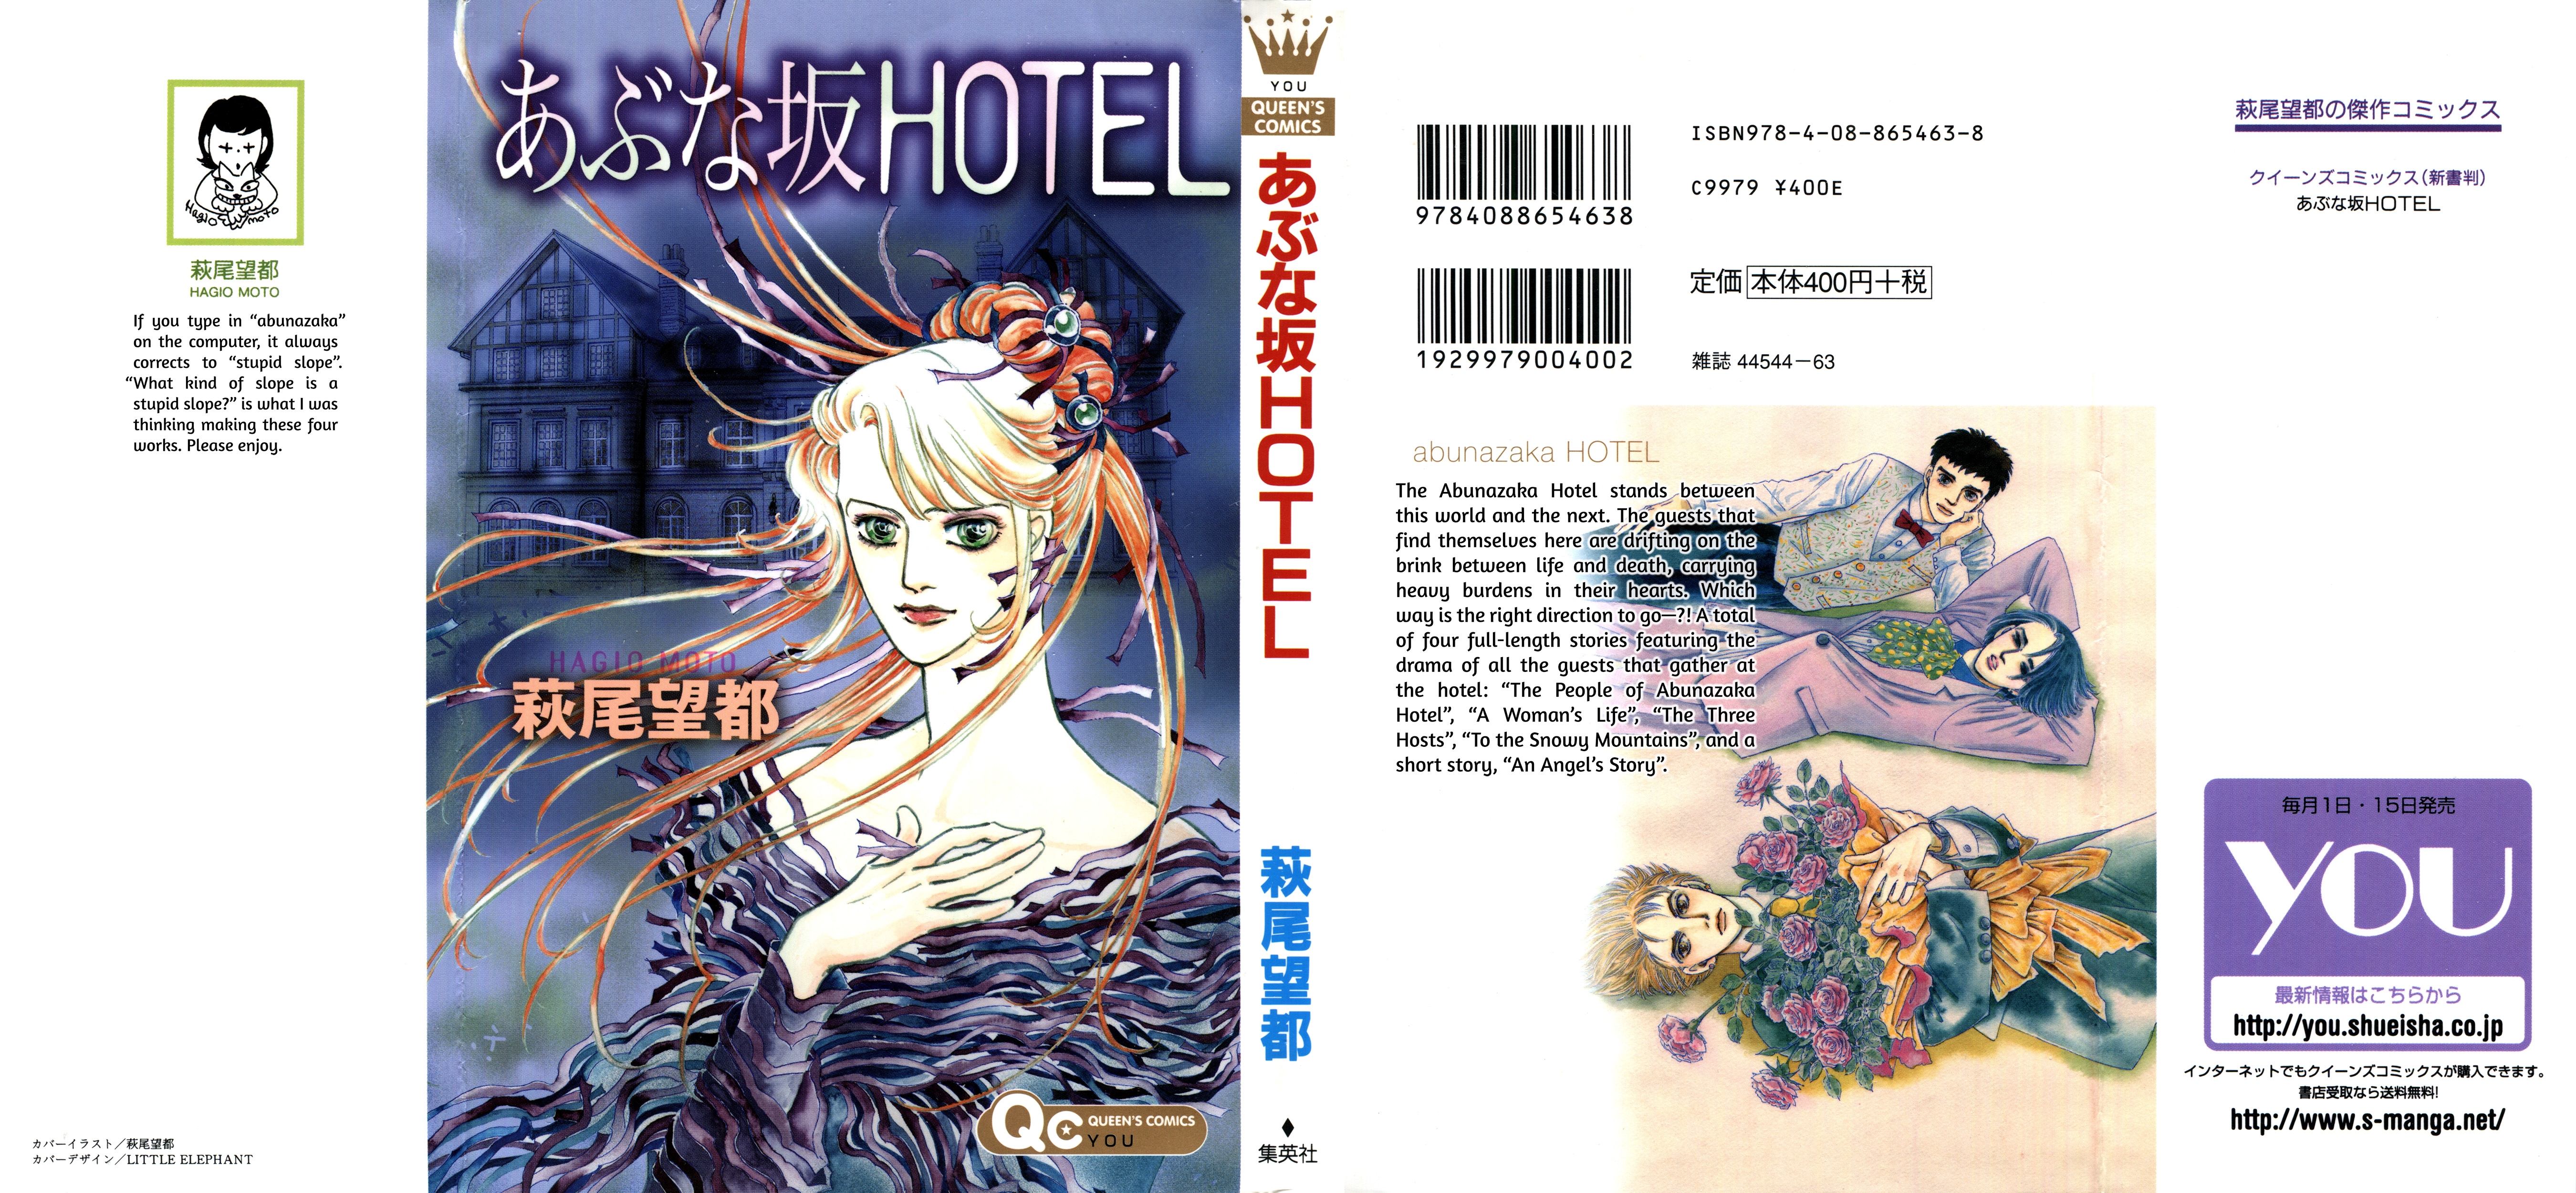 The Hotel On The Dangerous Hill Vol.1 Chapter 1: The People Of The Abunazaka Hotel - Picture 1